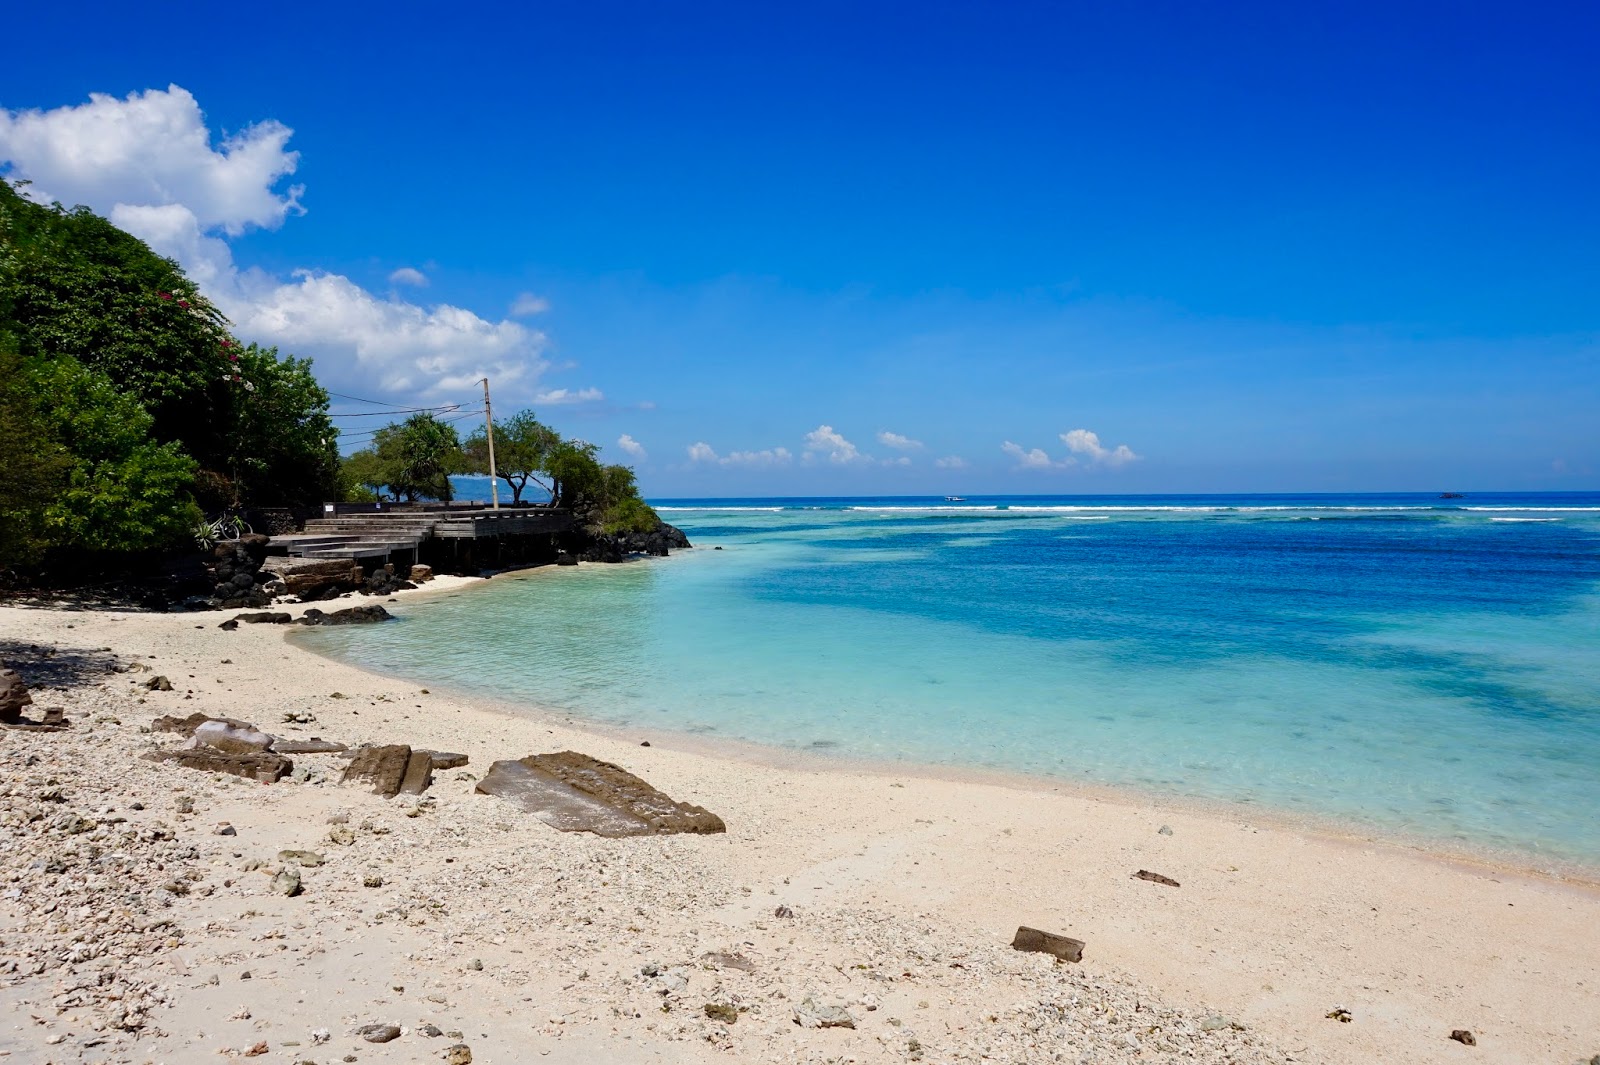 The Gili Islands, Indonesia - Travel guide - FLIP FLOPS ONLY